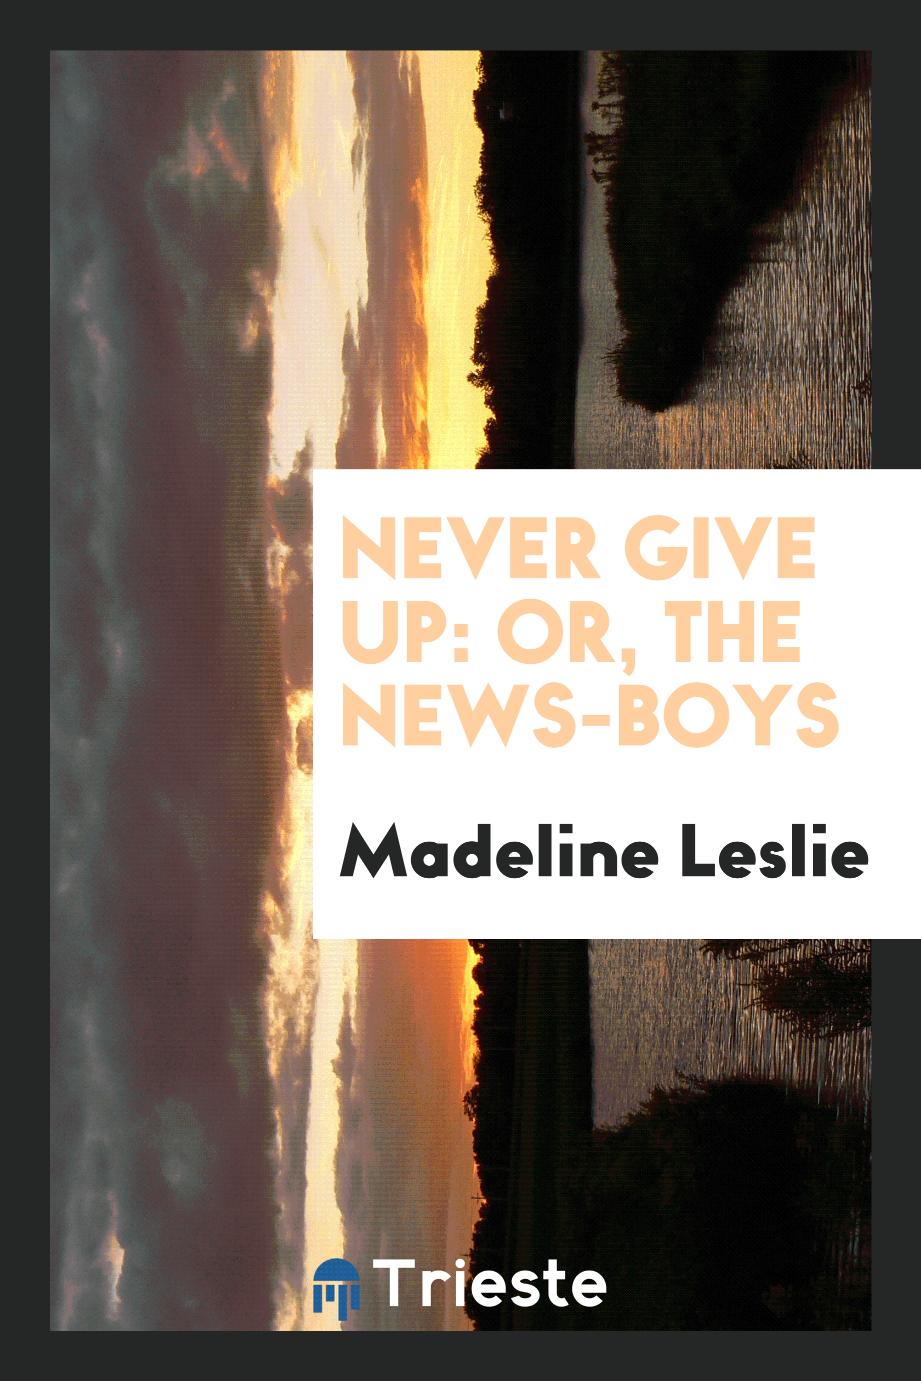 Never give up: or, the news-boys